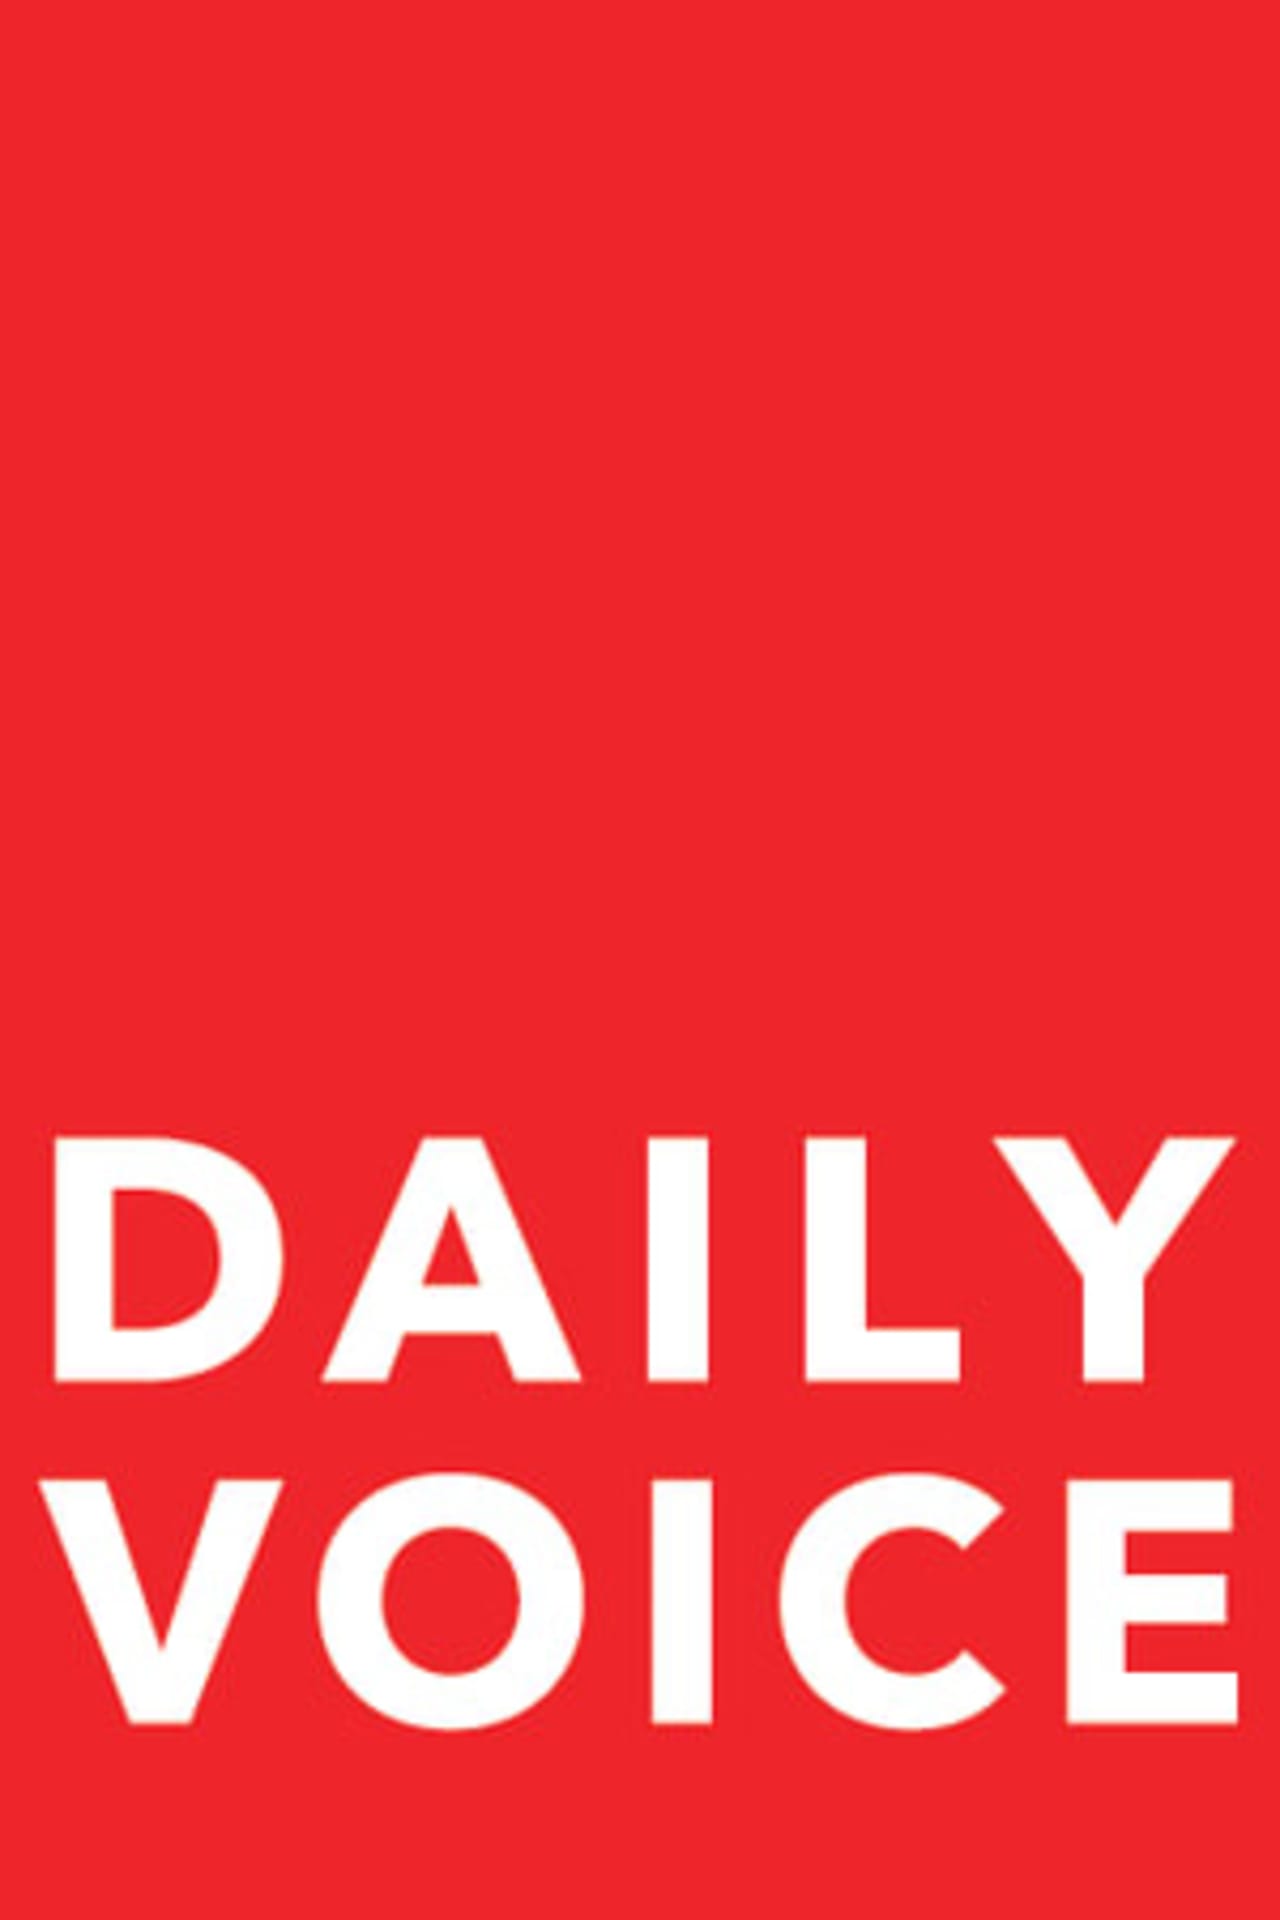 Add your events to The Tarrytown Daily Voice's events calendar.